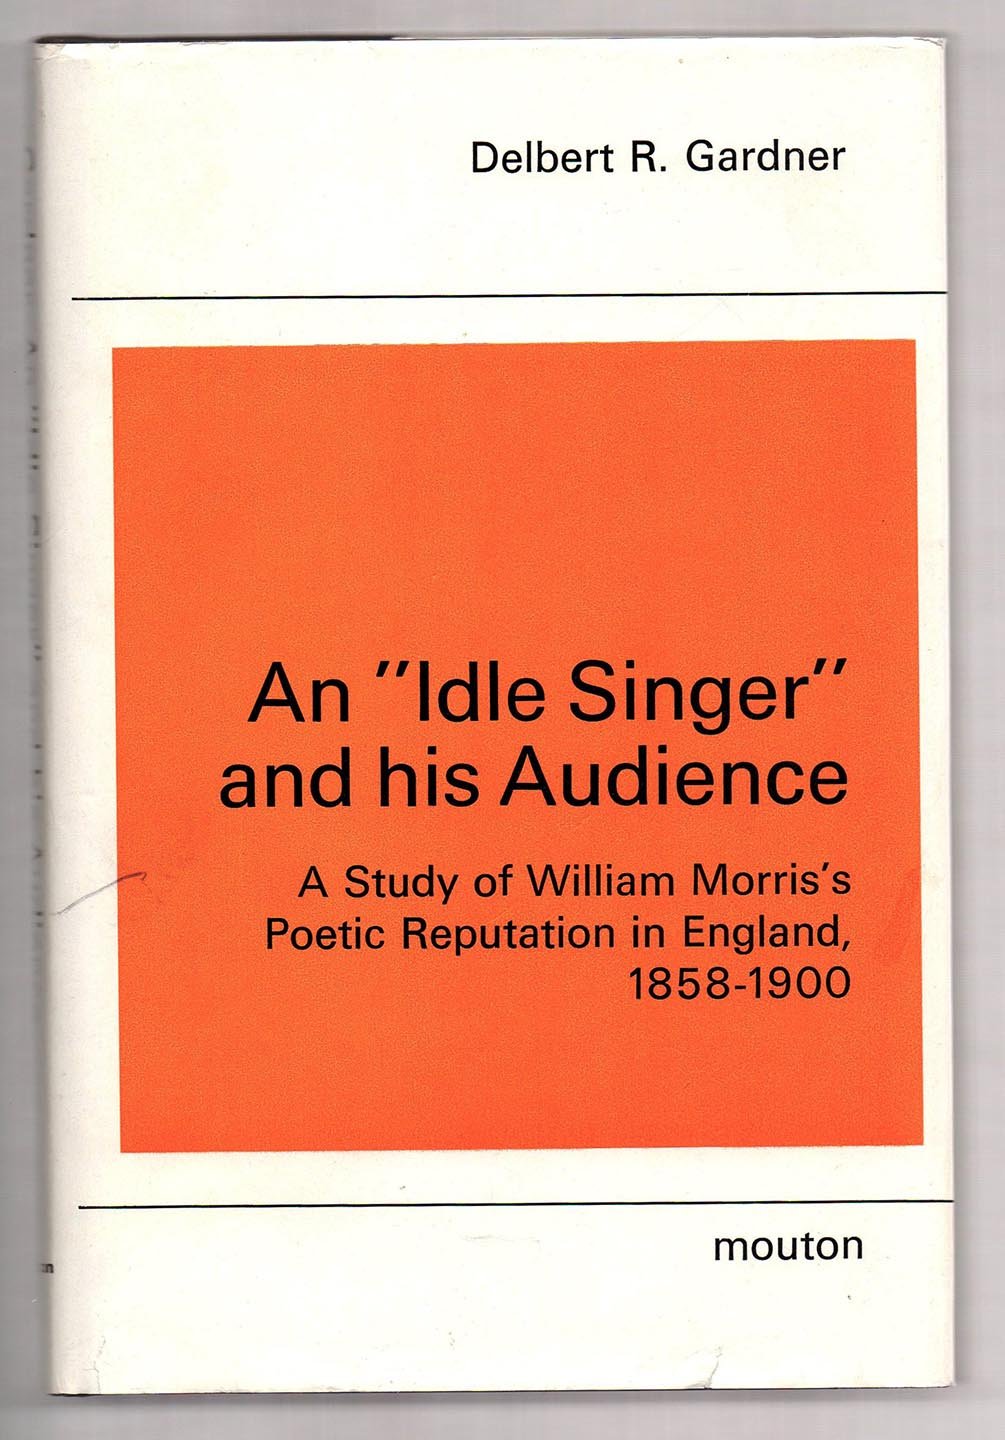 An "Idle Singer" and his Audience: A Study of William Morris's Poetic Reputation in England, 1858-1900